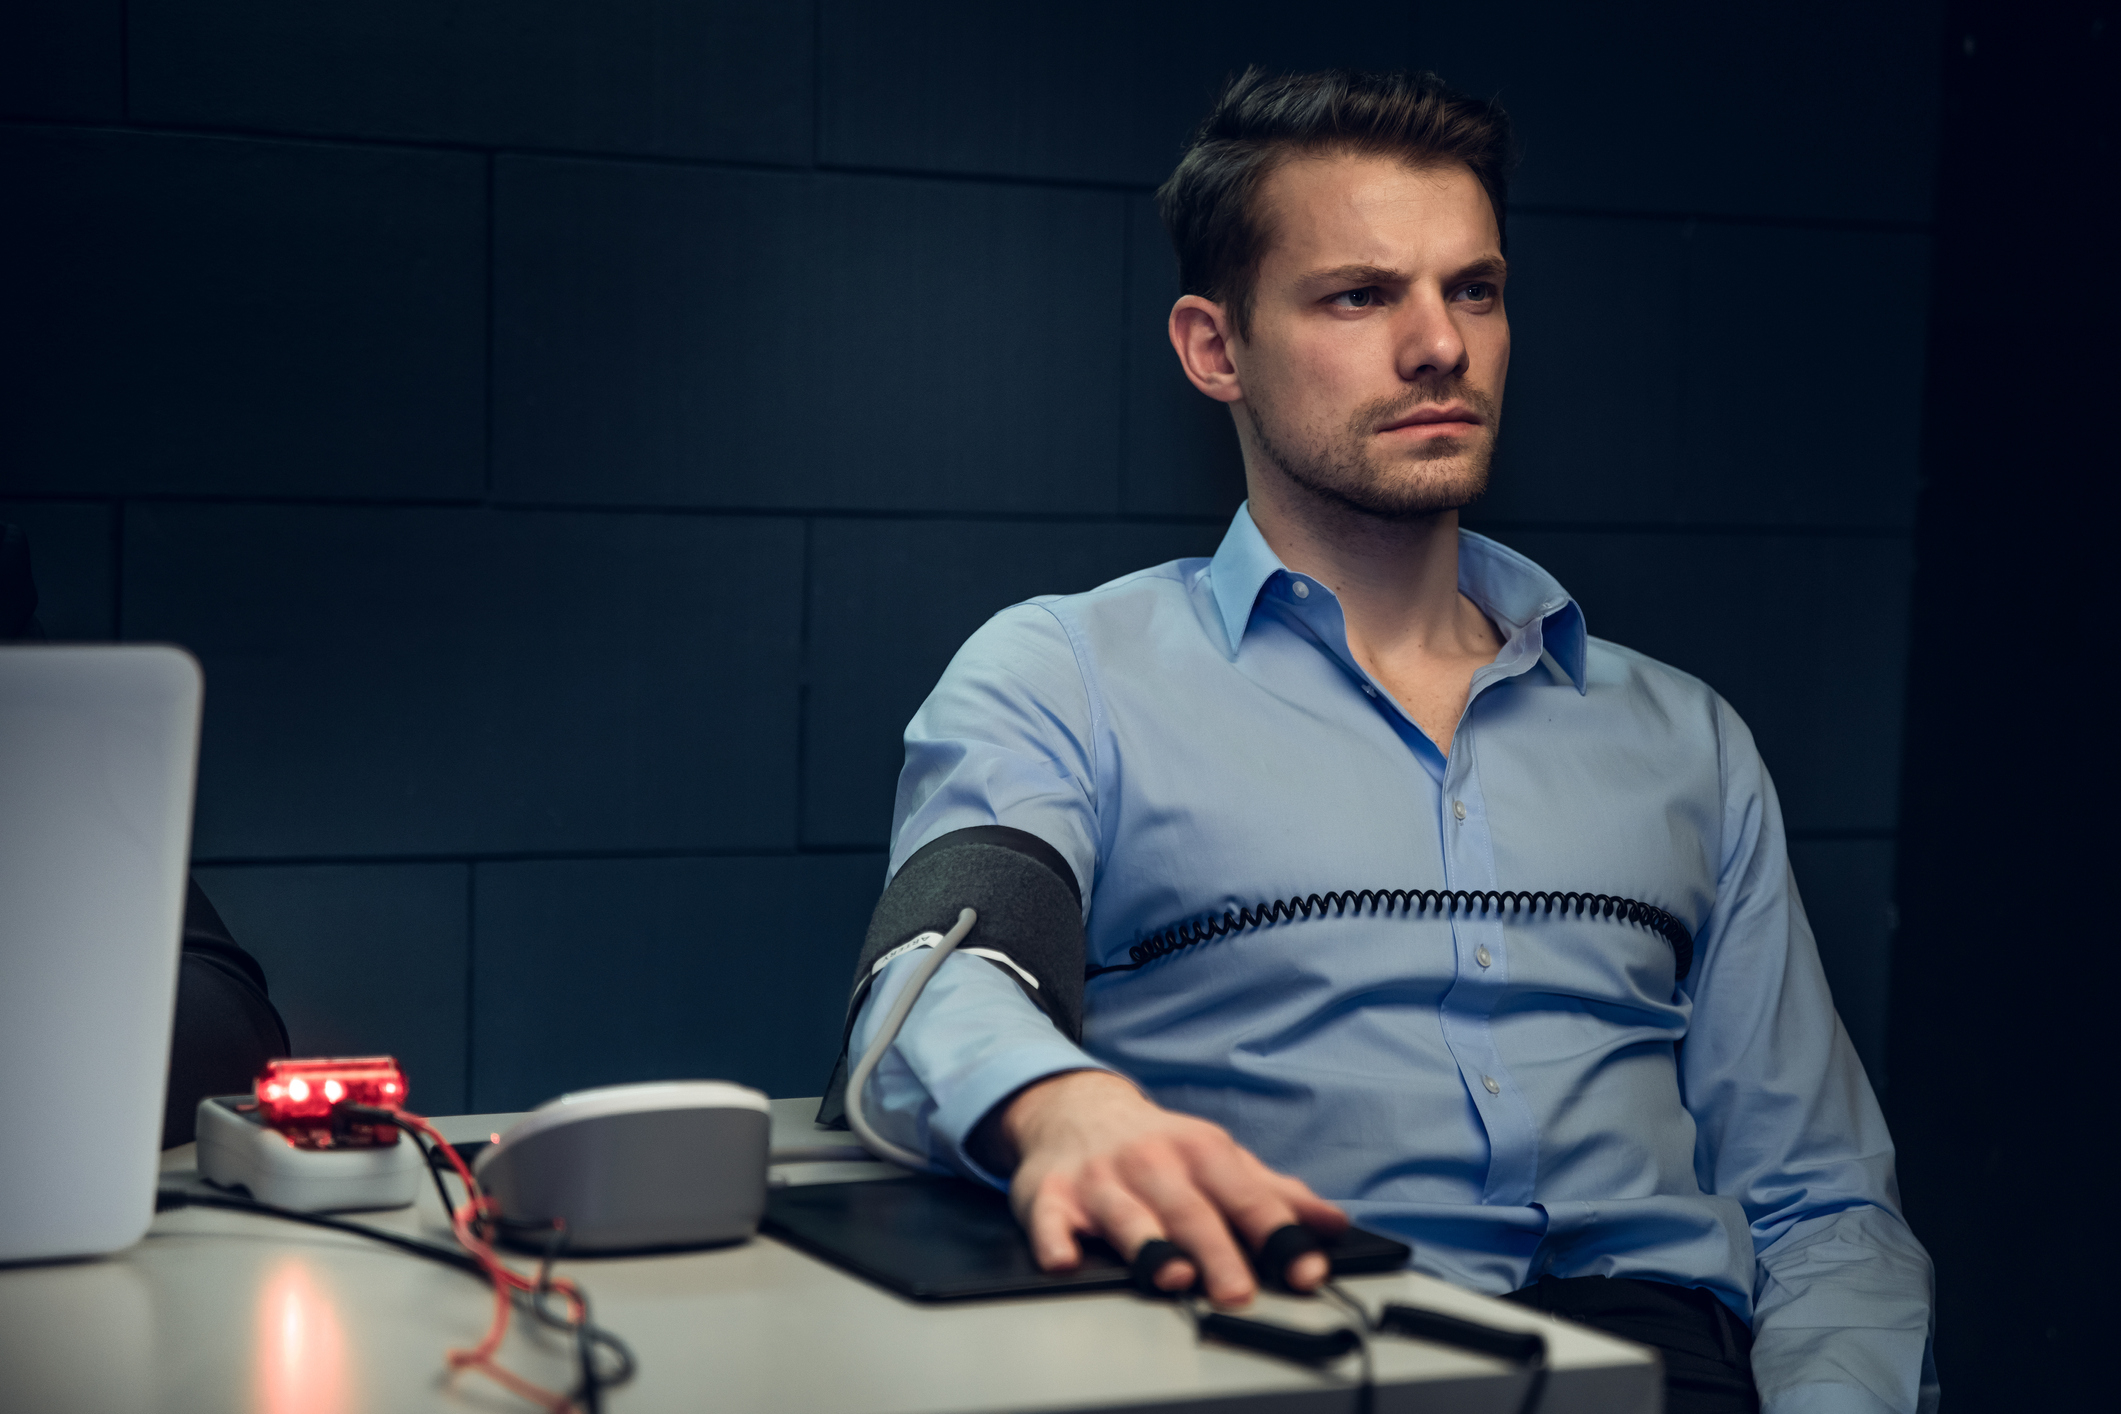 A man strapped to a lie detector test